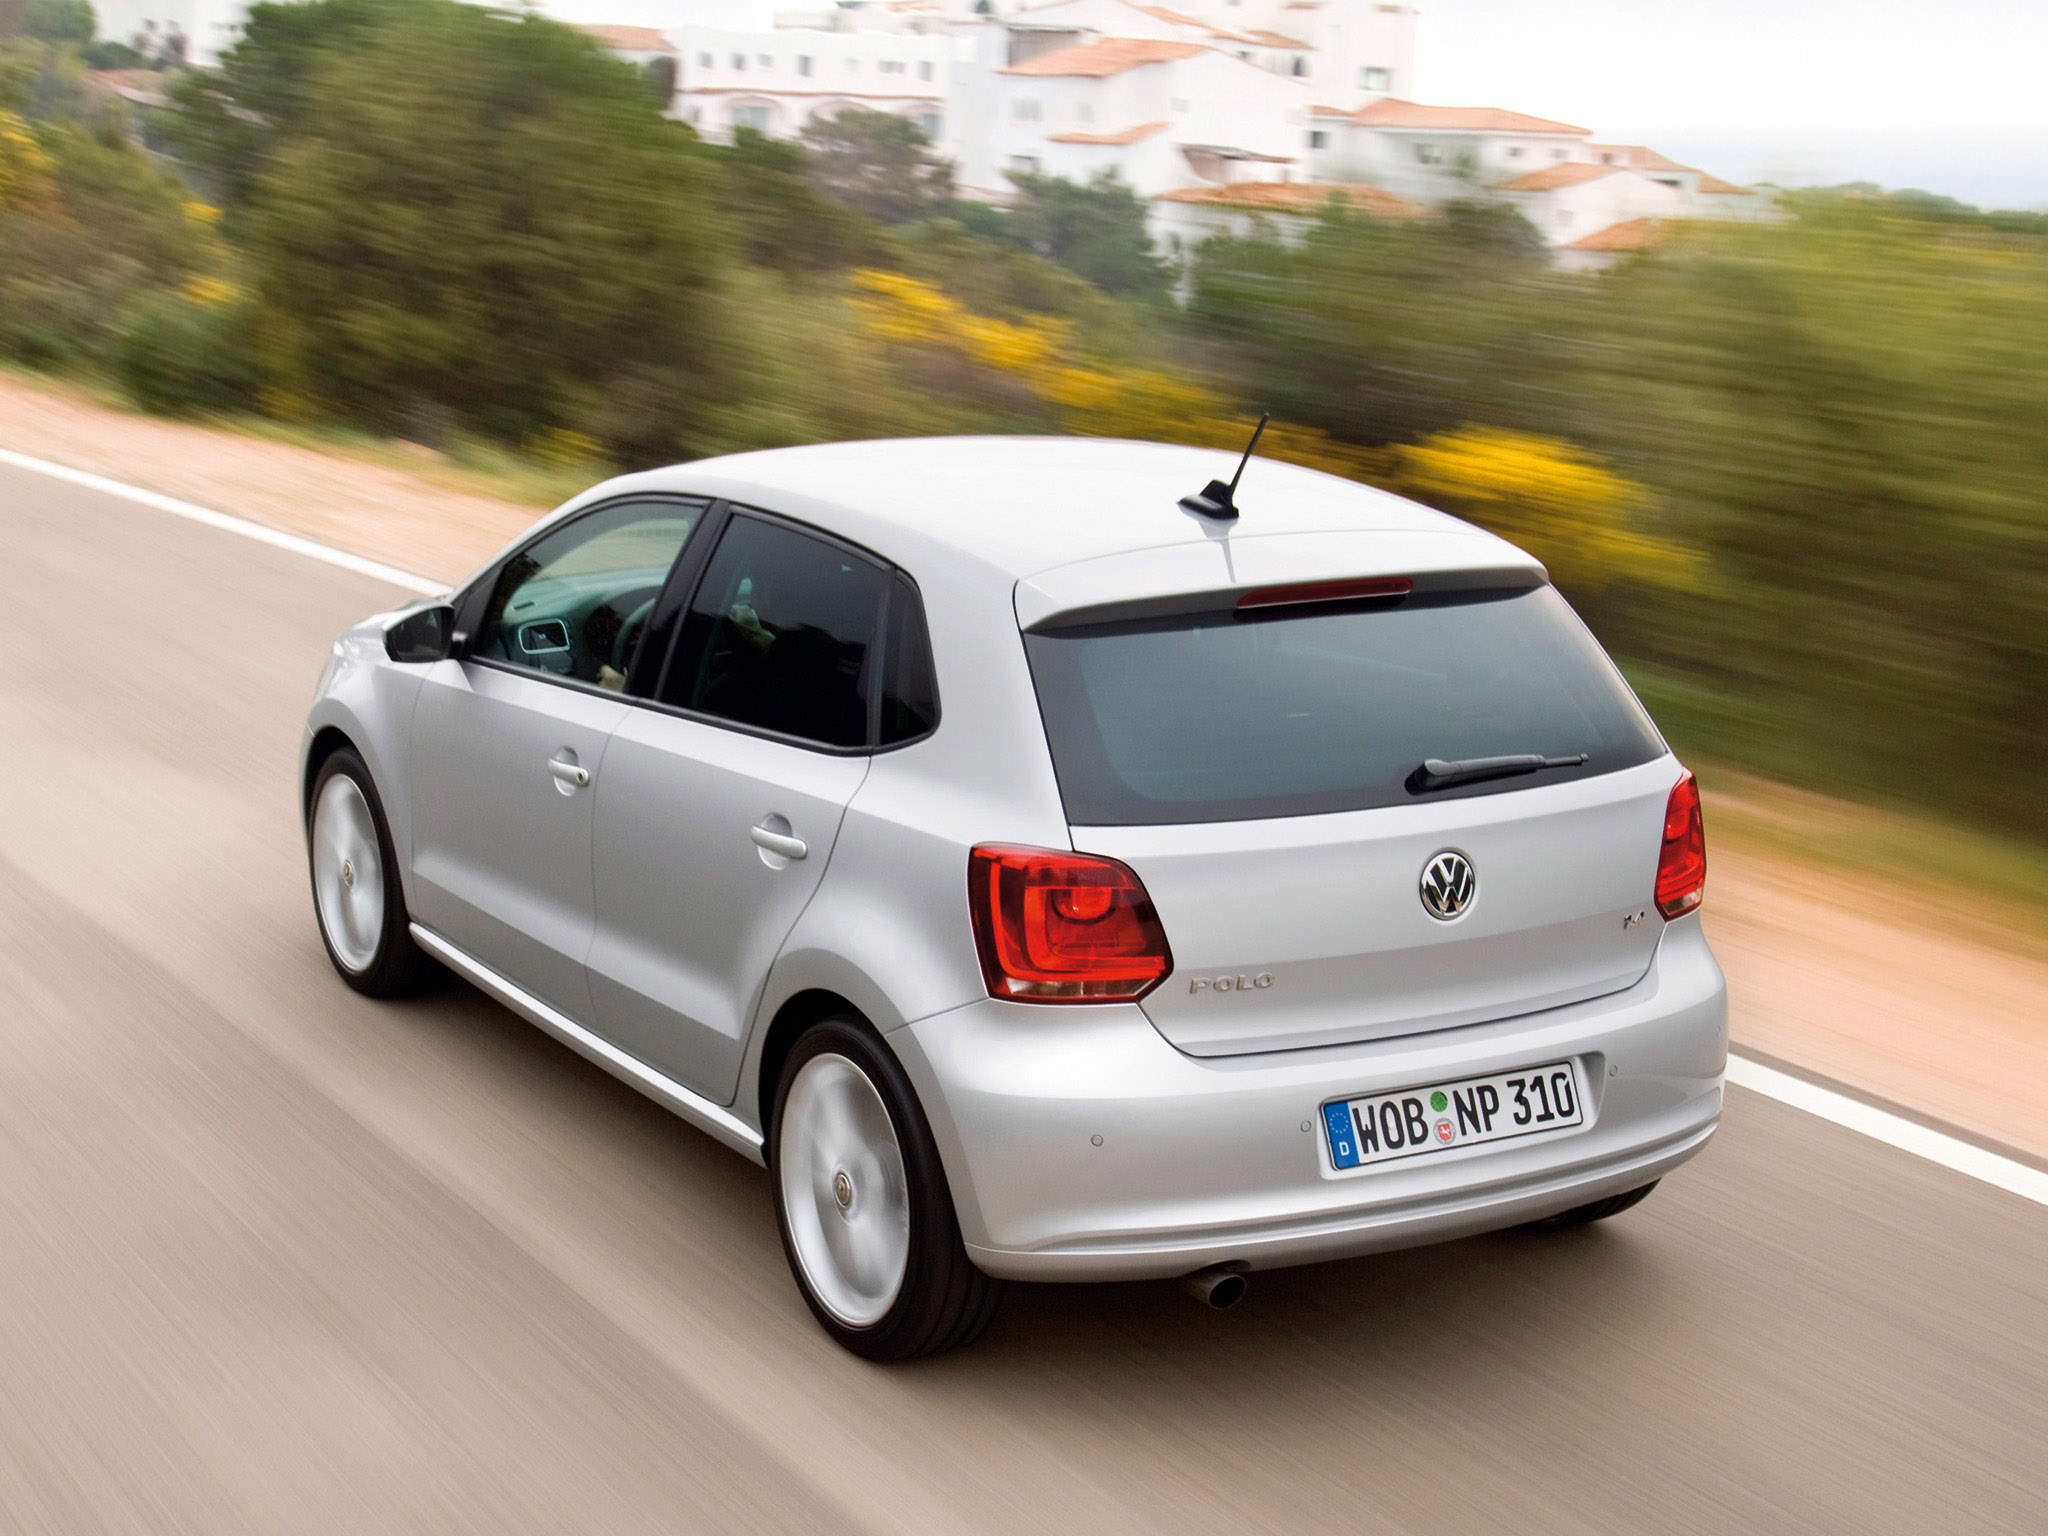 Car in pictures car photo gallery » Volkswagen Polo 2009